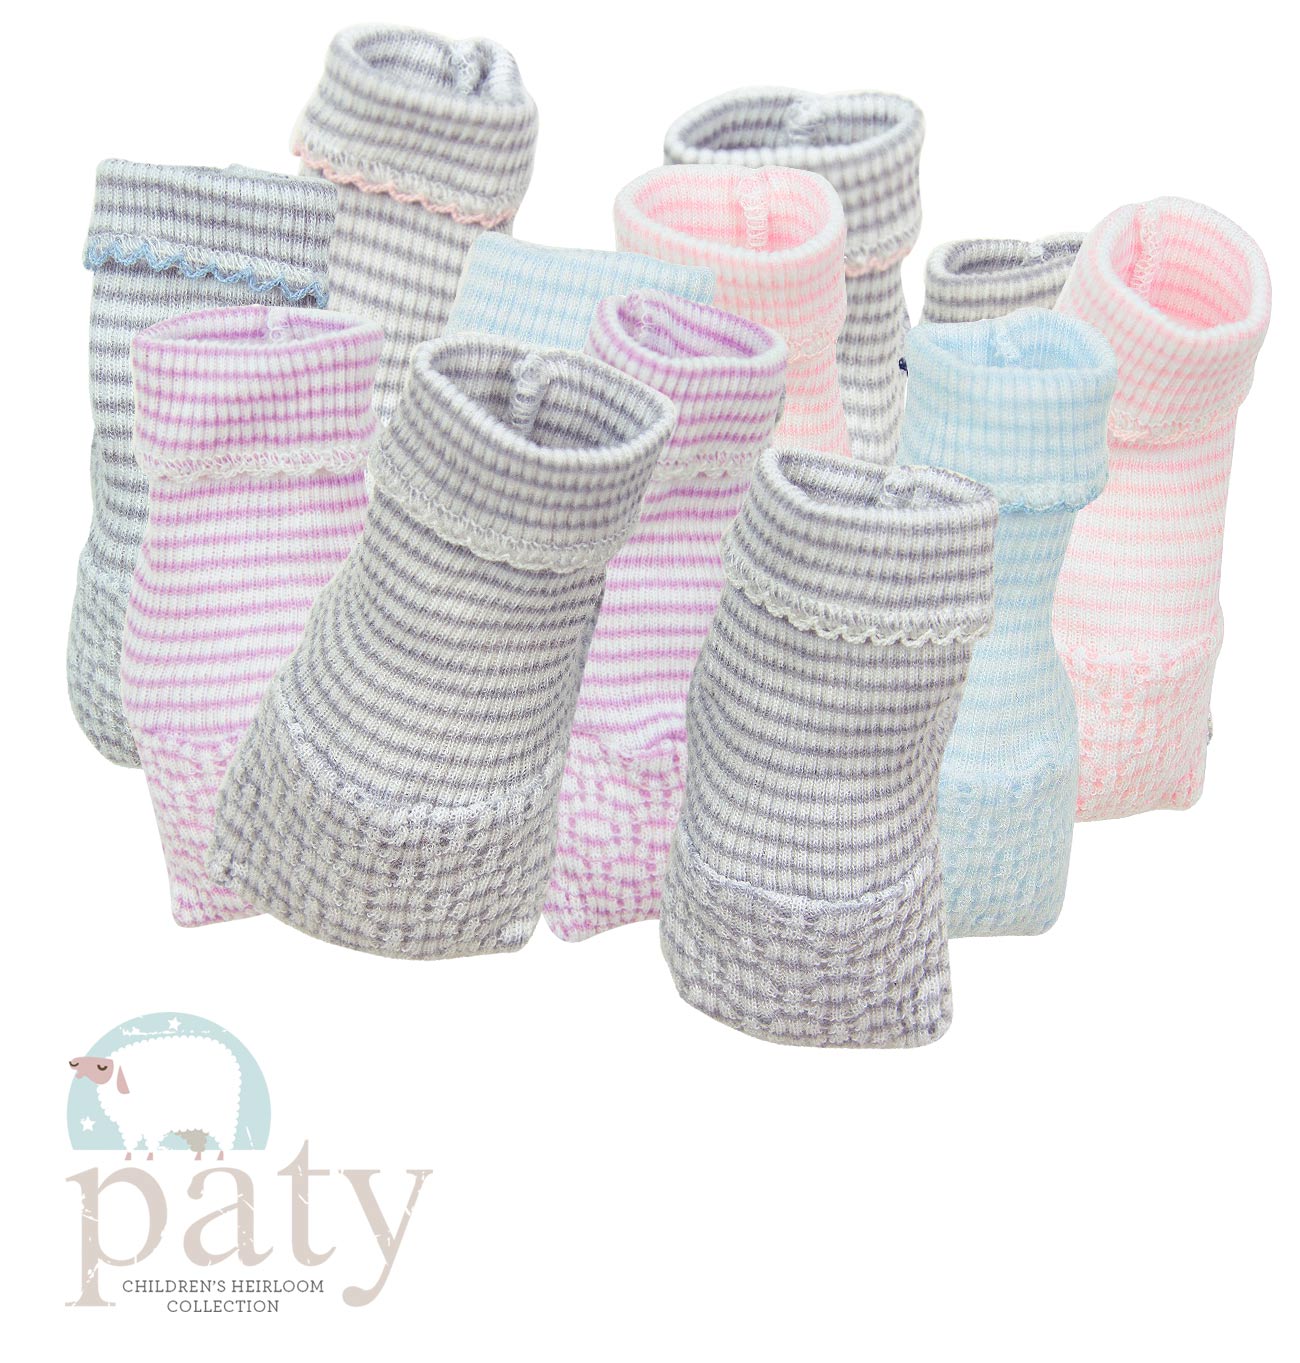 Paty Booties